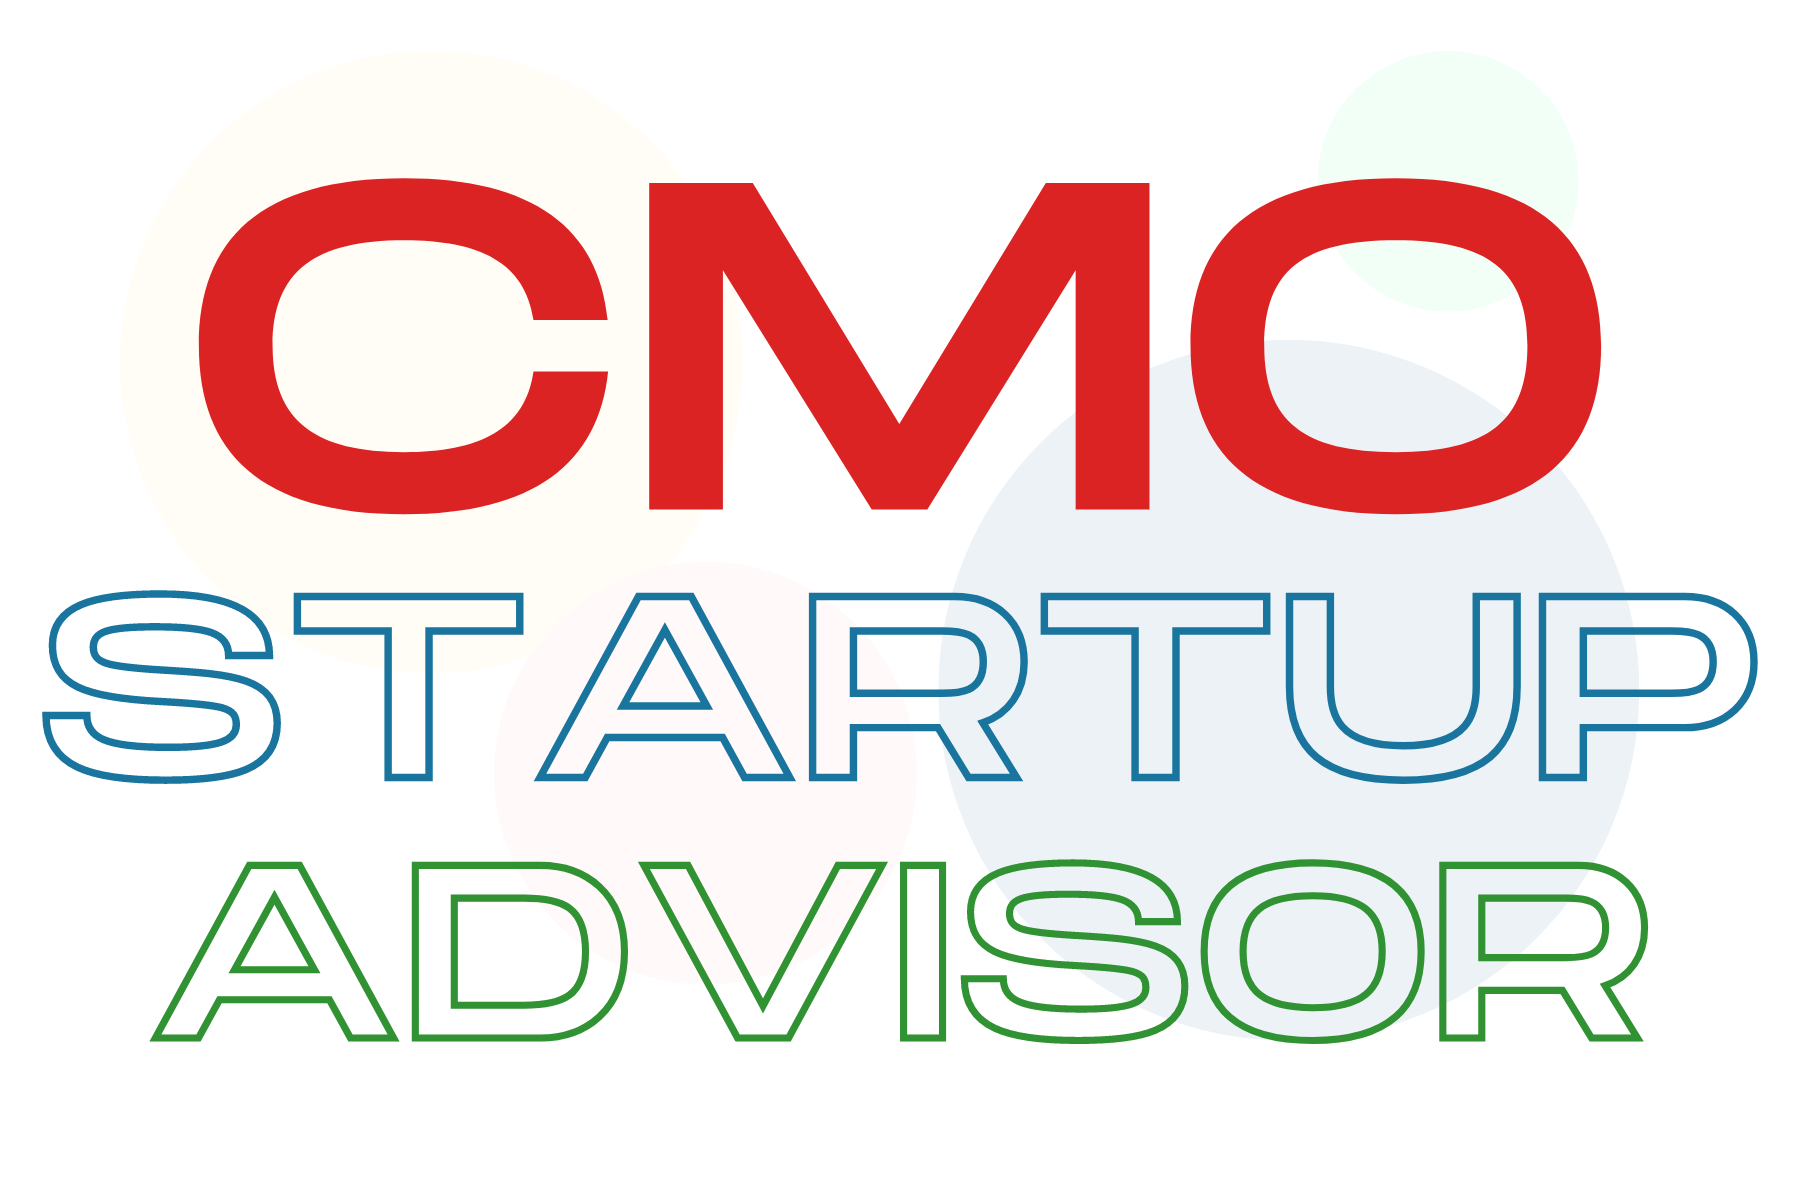 SaaS-CMO-Advisor-Marketing-Startup-business-funding-strategy-guide